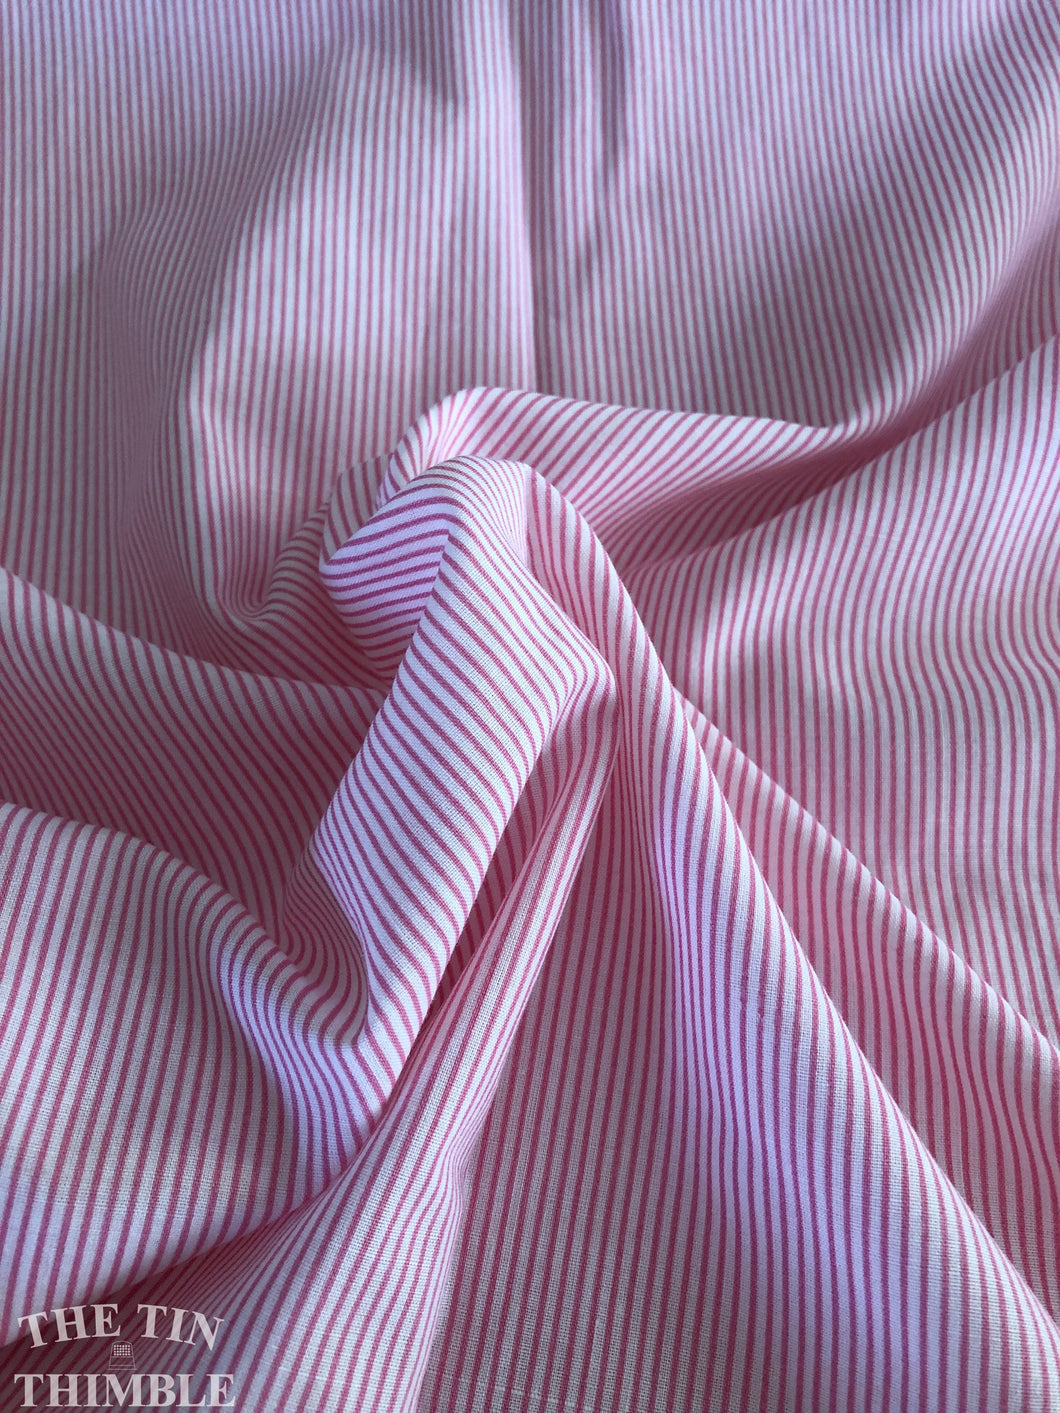 Vintage Narrow Pink and White Striped Cotton Fabric - By the Yard